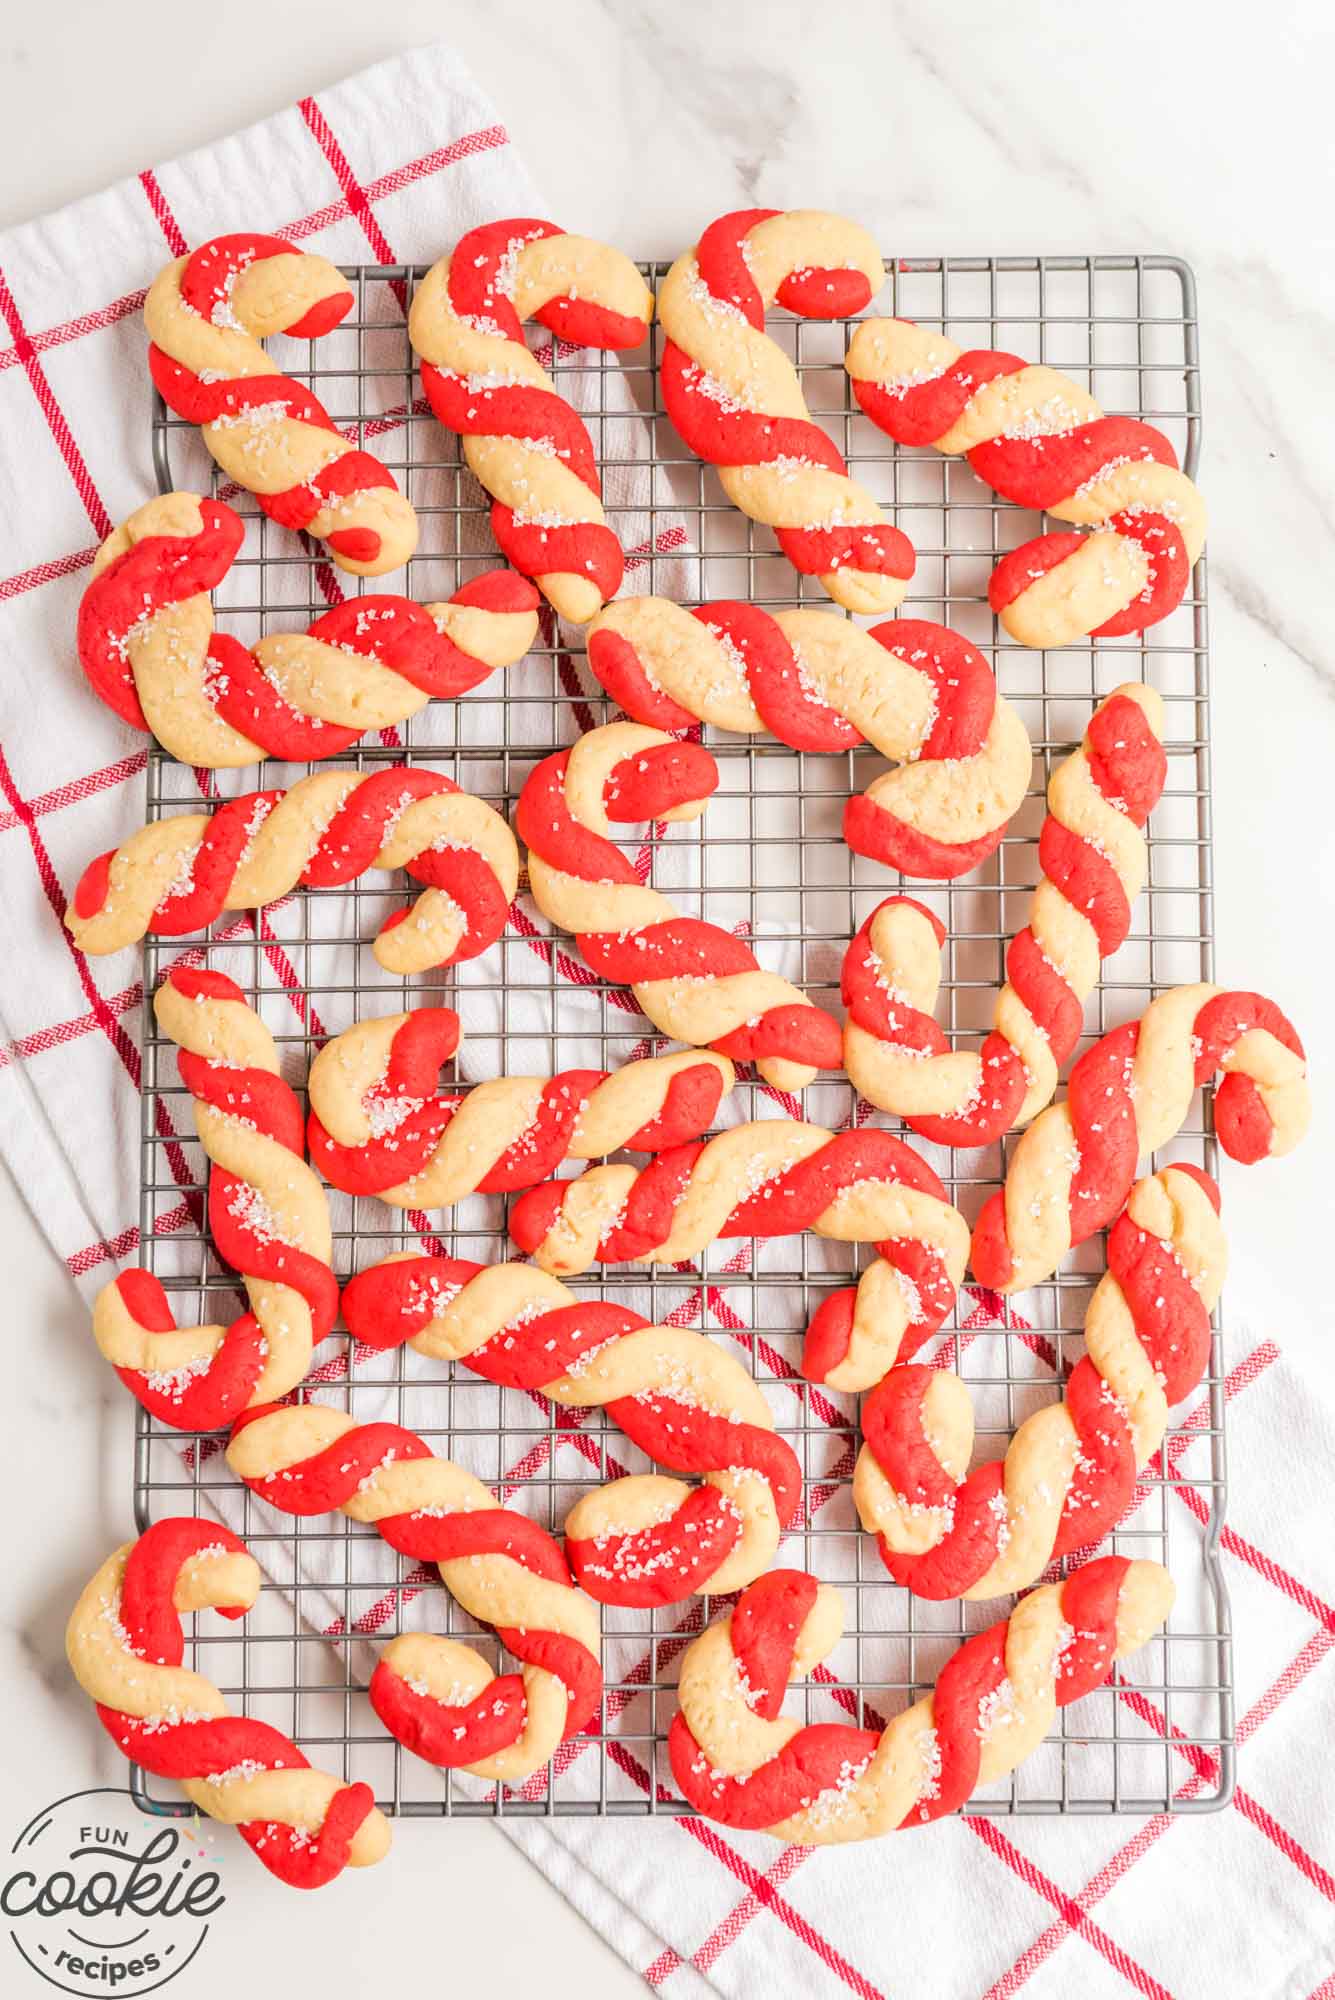 Red and white candy cane cookies made with two colors of dough, on a wire rack, cooling.